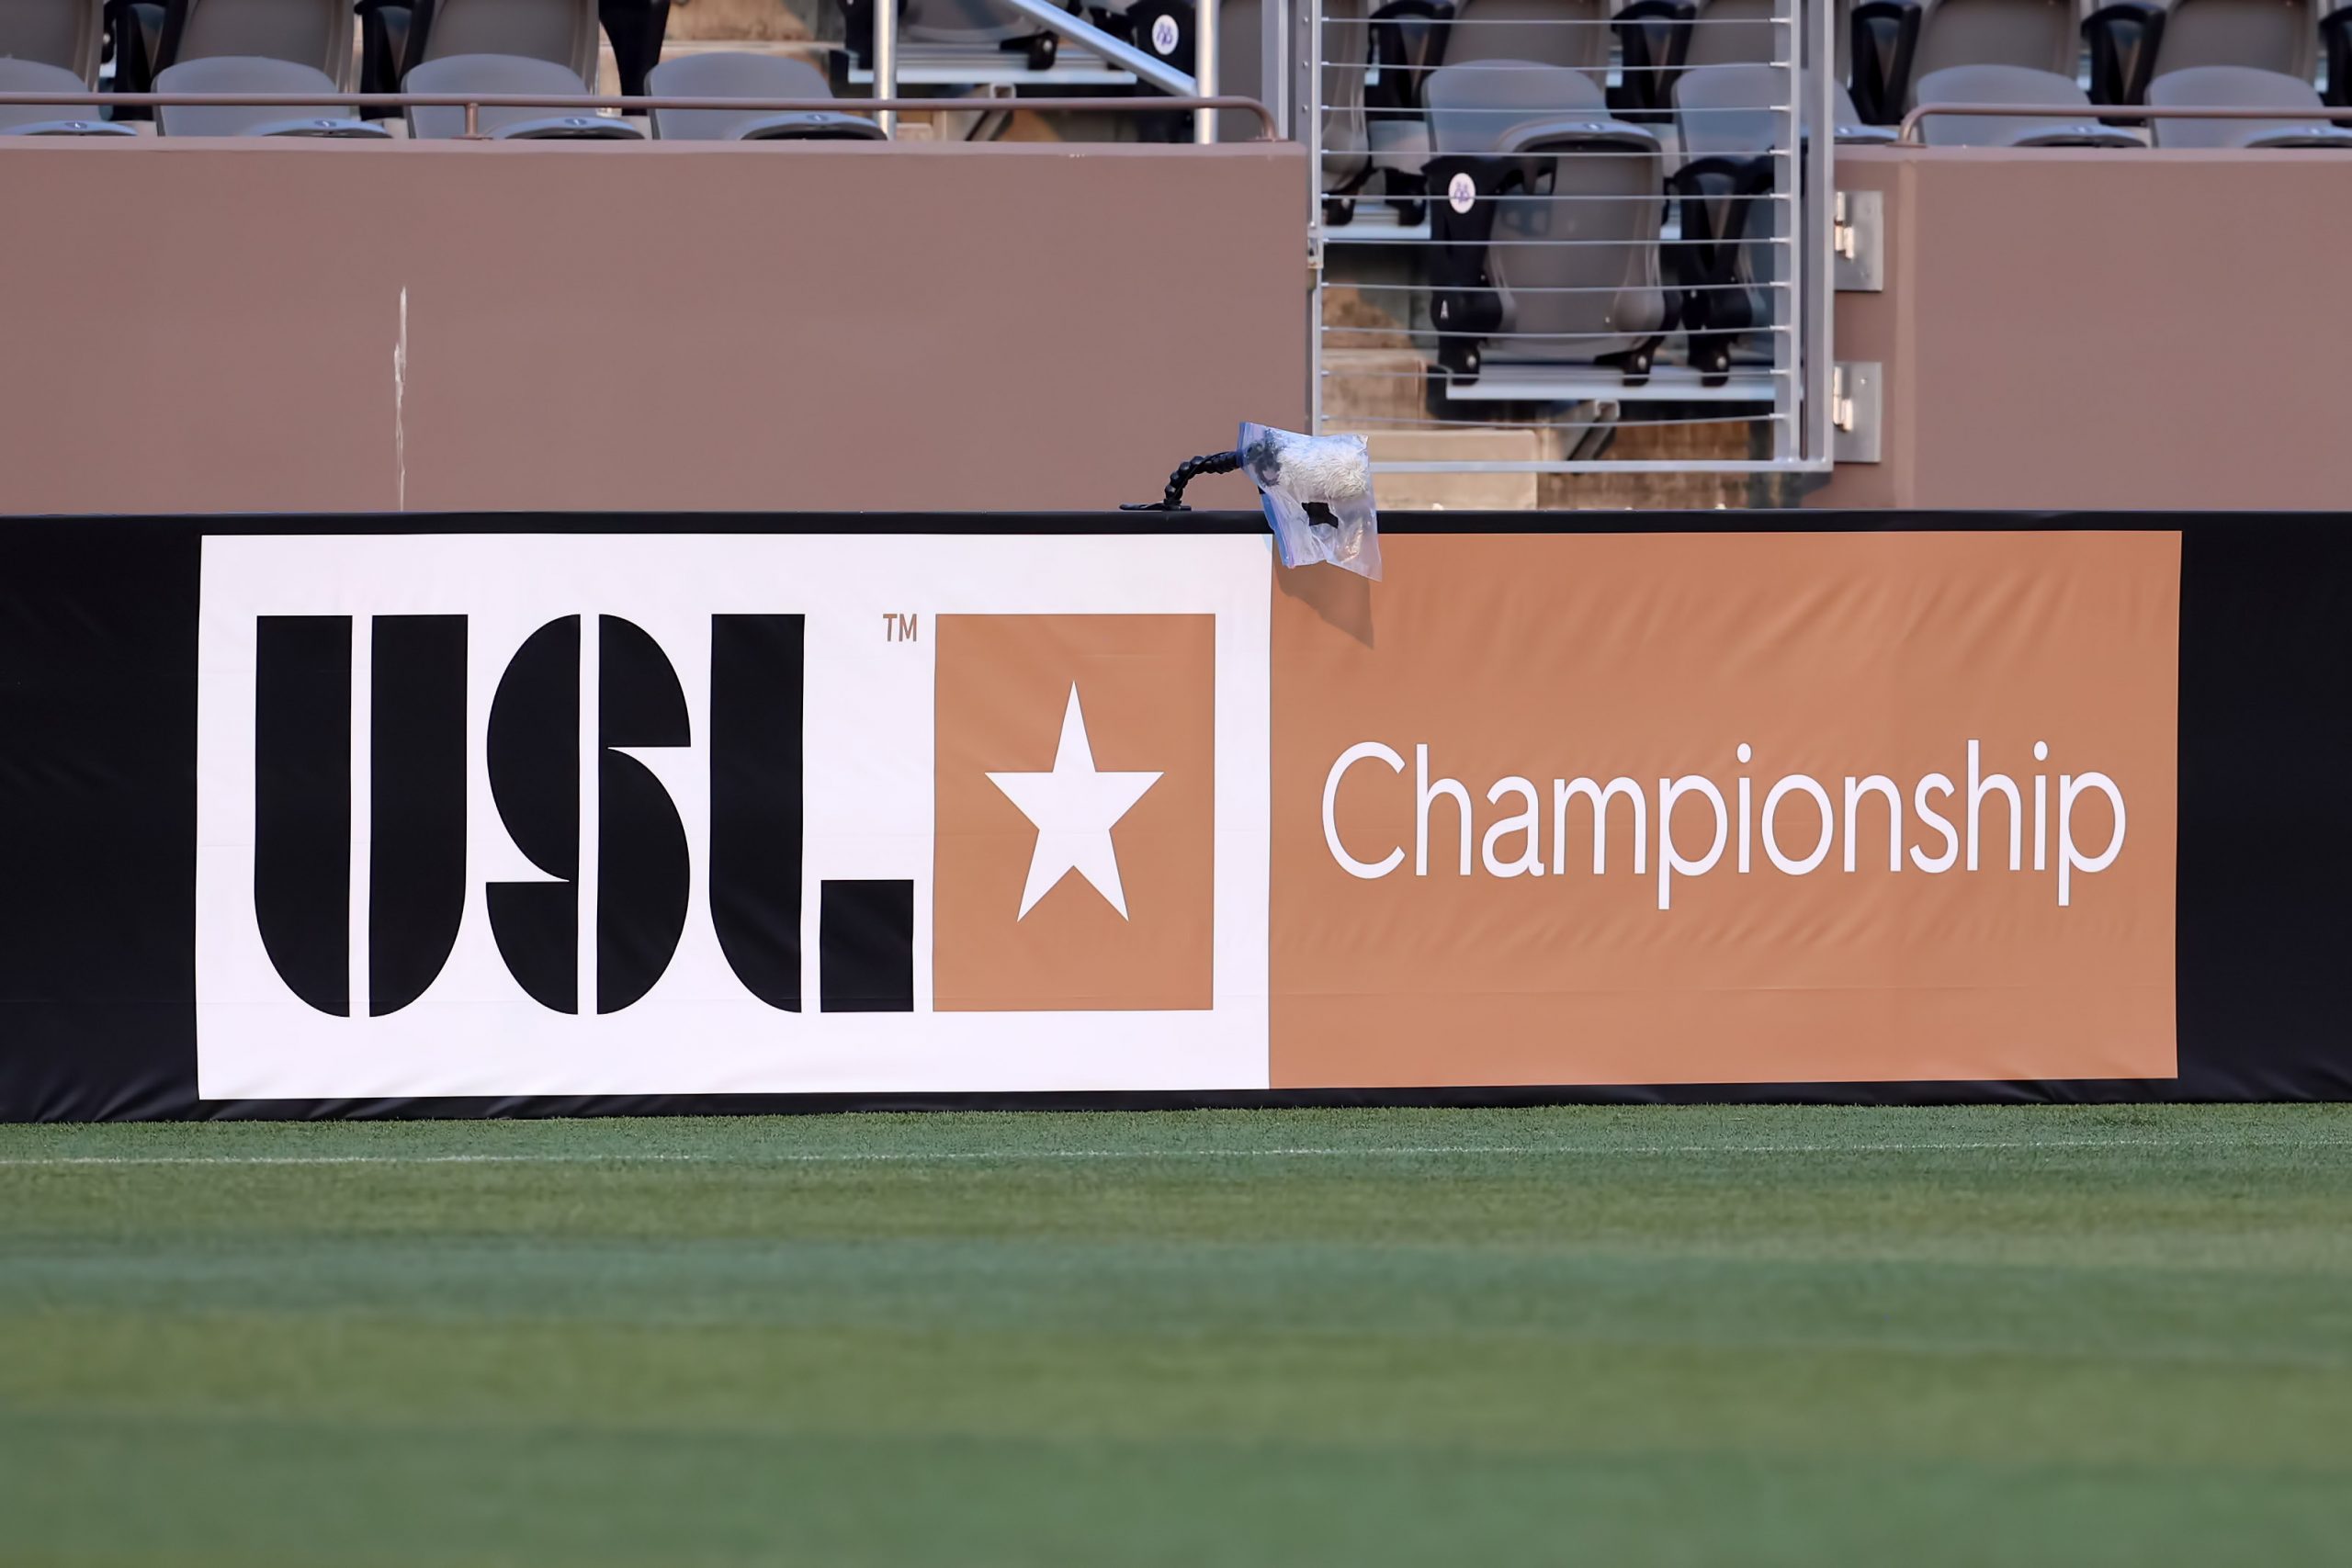 A general view of USL Championship signage during the Lamar Hunt US Open Cup quarterfinal game betw...